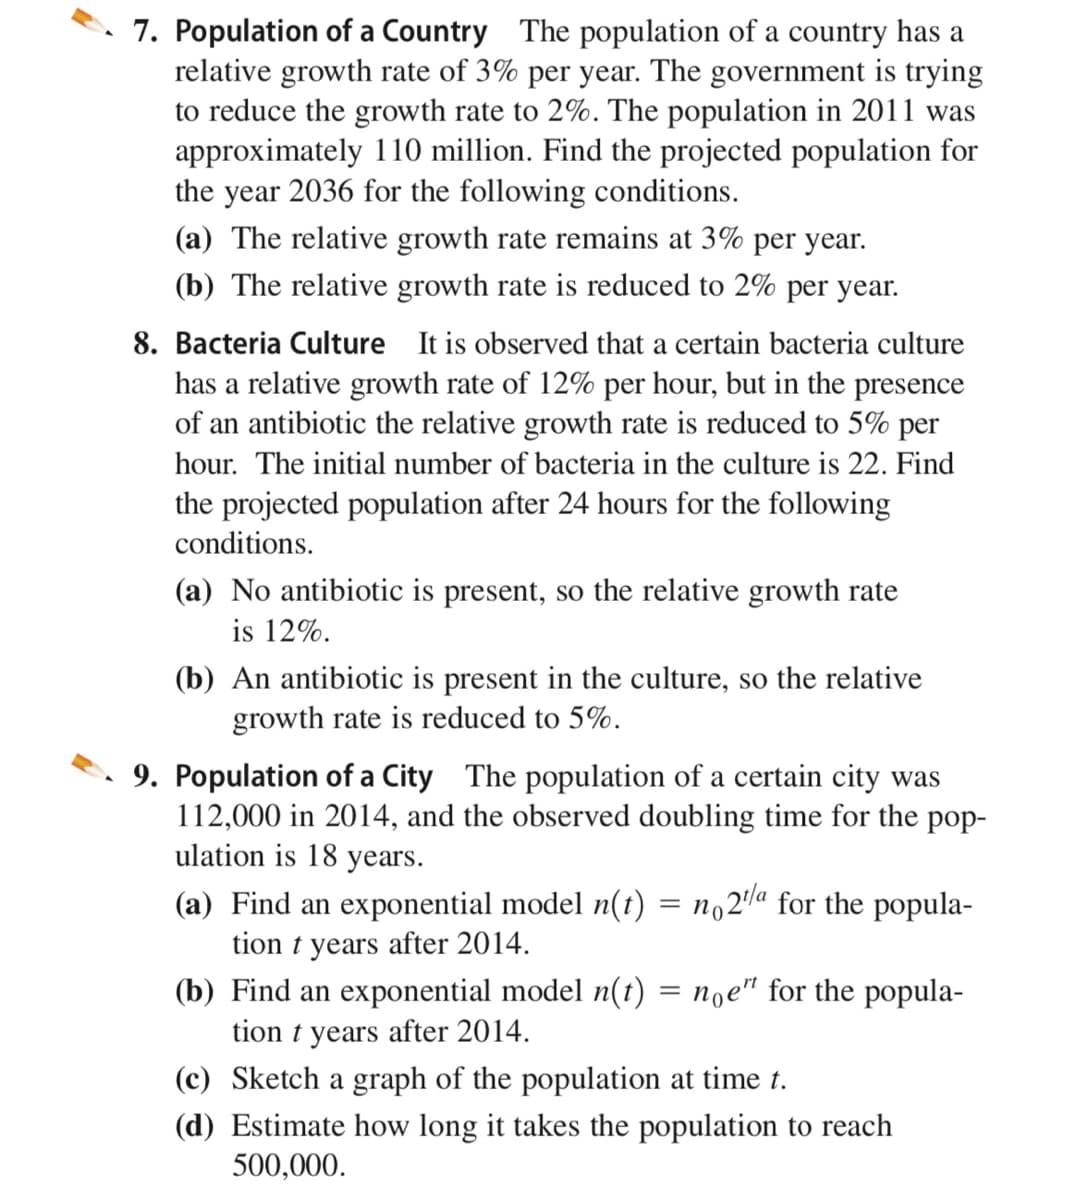 7. Population of a Country The population of a country has a
relative growth rate of 3% per year. The government is trying
to reduce the growth rate to 2%. The population in 2011 was
approximately 110 million. Find the projected population for
the year 2036 for the following conditions.
(a) The relative growth rate remains at 3% per year.
(b) The relative growth rate is reduced to 2% per year.
8. Bacteria Culture It is observed that a certain bacteria culture
has a relative growth rate of 12% per hour, but in the presence
of an antibiotic the relative growth rate is reduced to 5% per
hour. The initial number of bacteria in the culture is 22.
the projected population after 24 hours for the following
ind
conditions.
(a) No antibiotic is present, so the relative growth rate
is 12%.
(b) An antibiotic is present in the culture, so the relative
growth rate is reduced to 5%.
9. Population of a City The population of a certain city was
112,000 in 2014, and the observed doubling time for the pop-
ulation is 18 years.
(a) Find an exponential model n(t) = no2la for the popula-
tion t years after 2014.
(b) Find an exponential model n(t) = noe" for the popula-
tion t years after 2014.
(c) Sketch a graph of the population at time t.
(d) Estimate how long it takes the population to reach
500,000.
